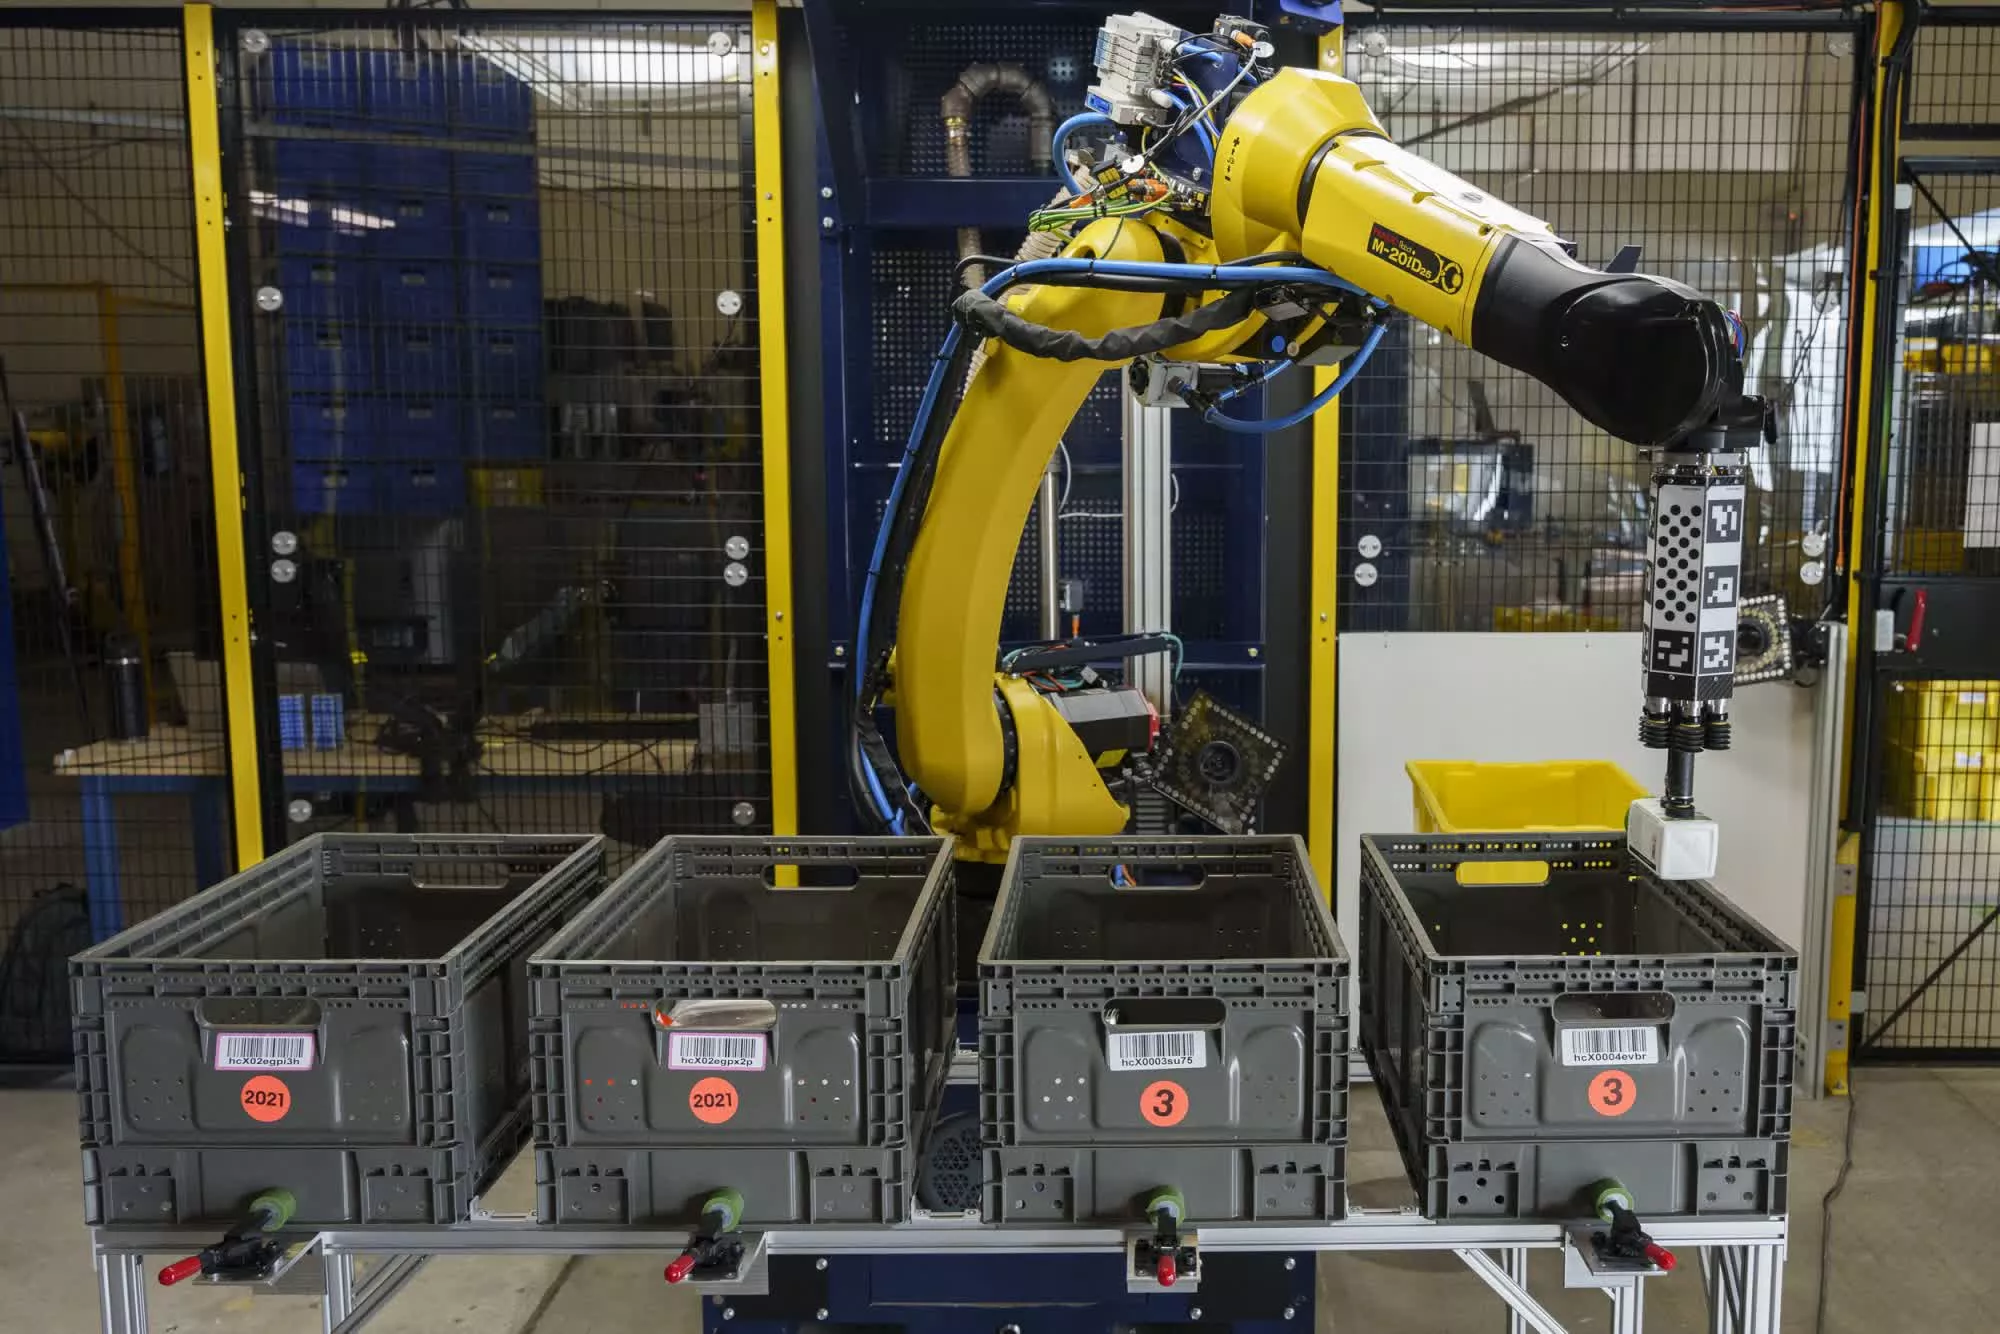 AI-powered Amazon warehouse robot performs the repetitive tasks carried out by human workers